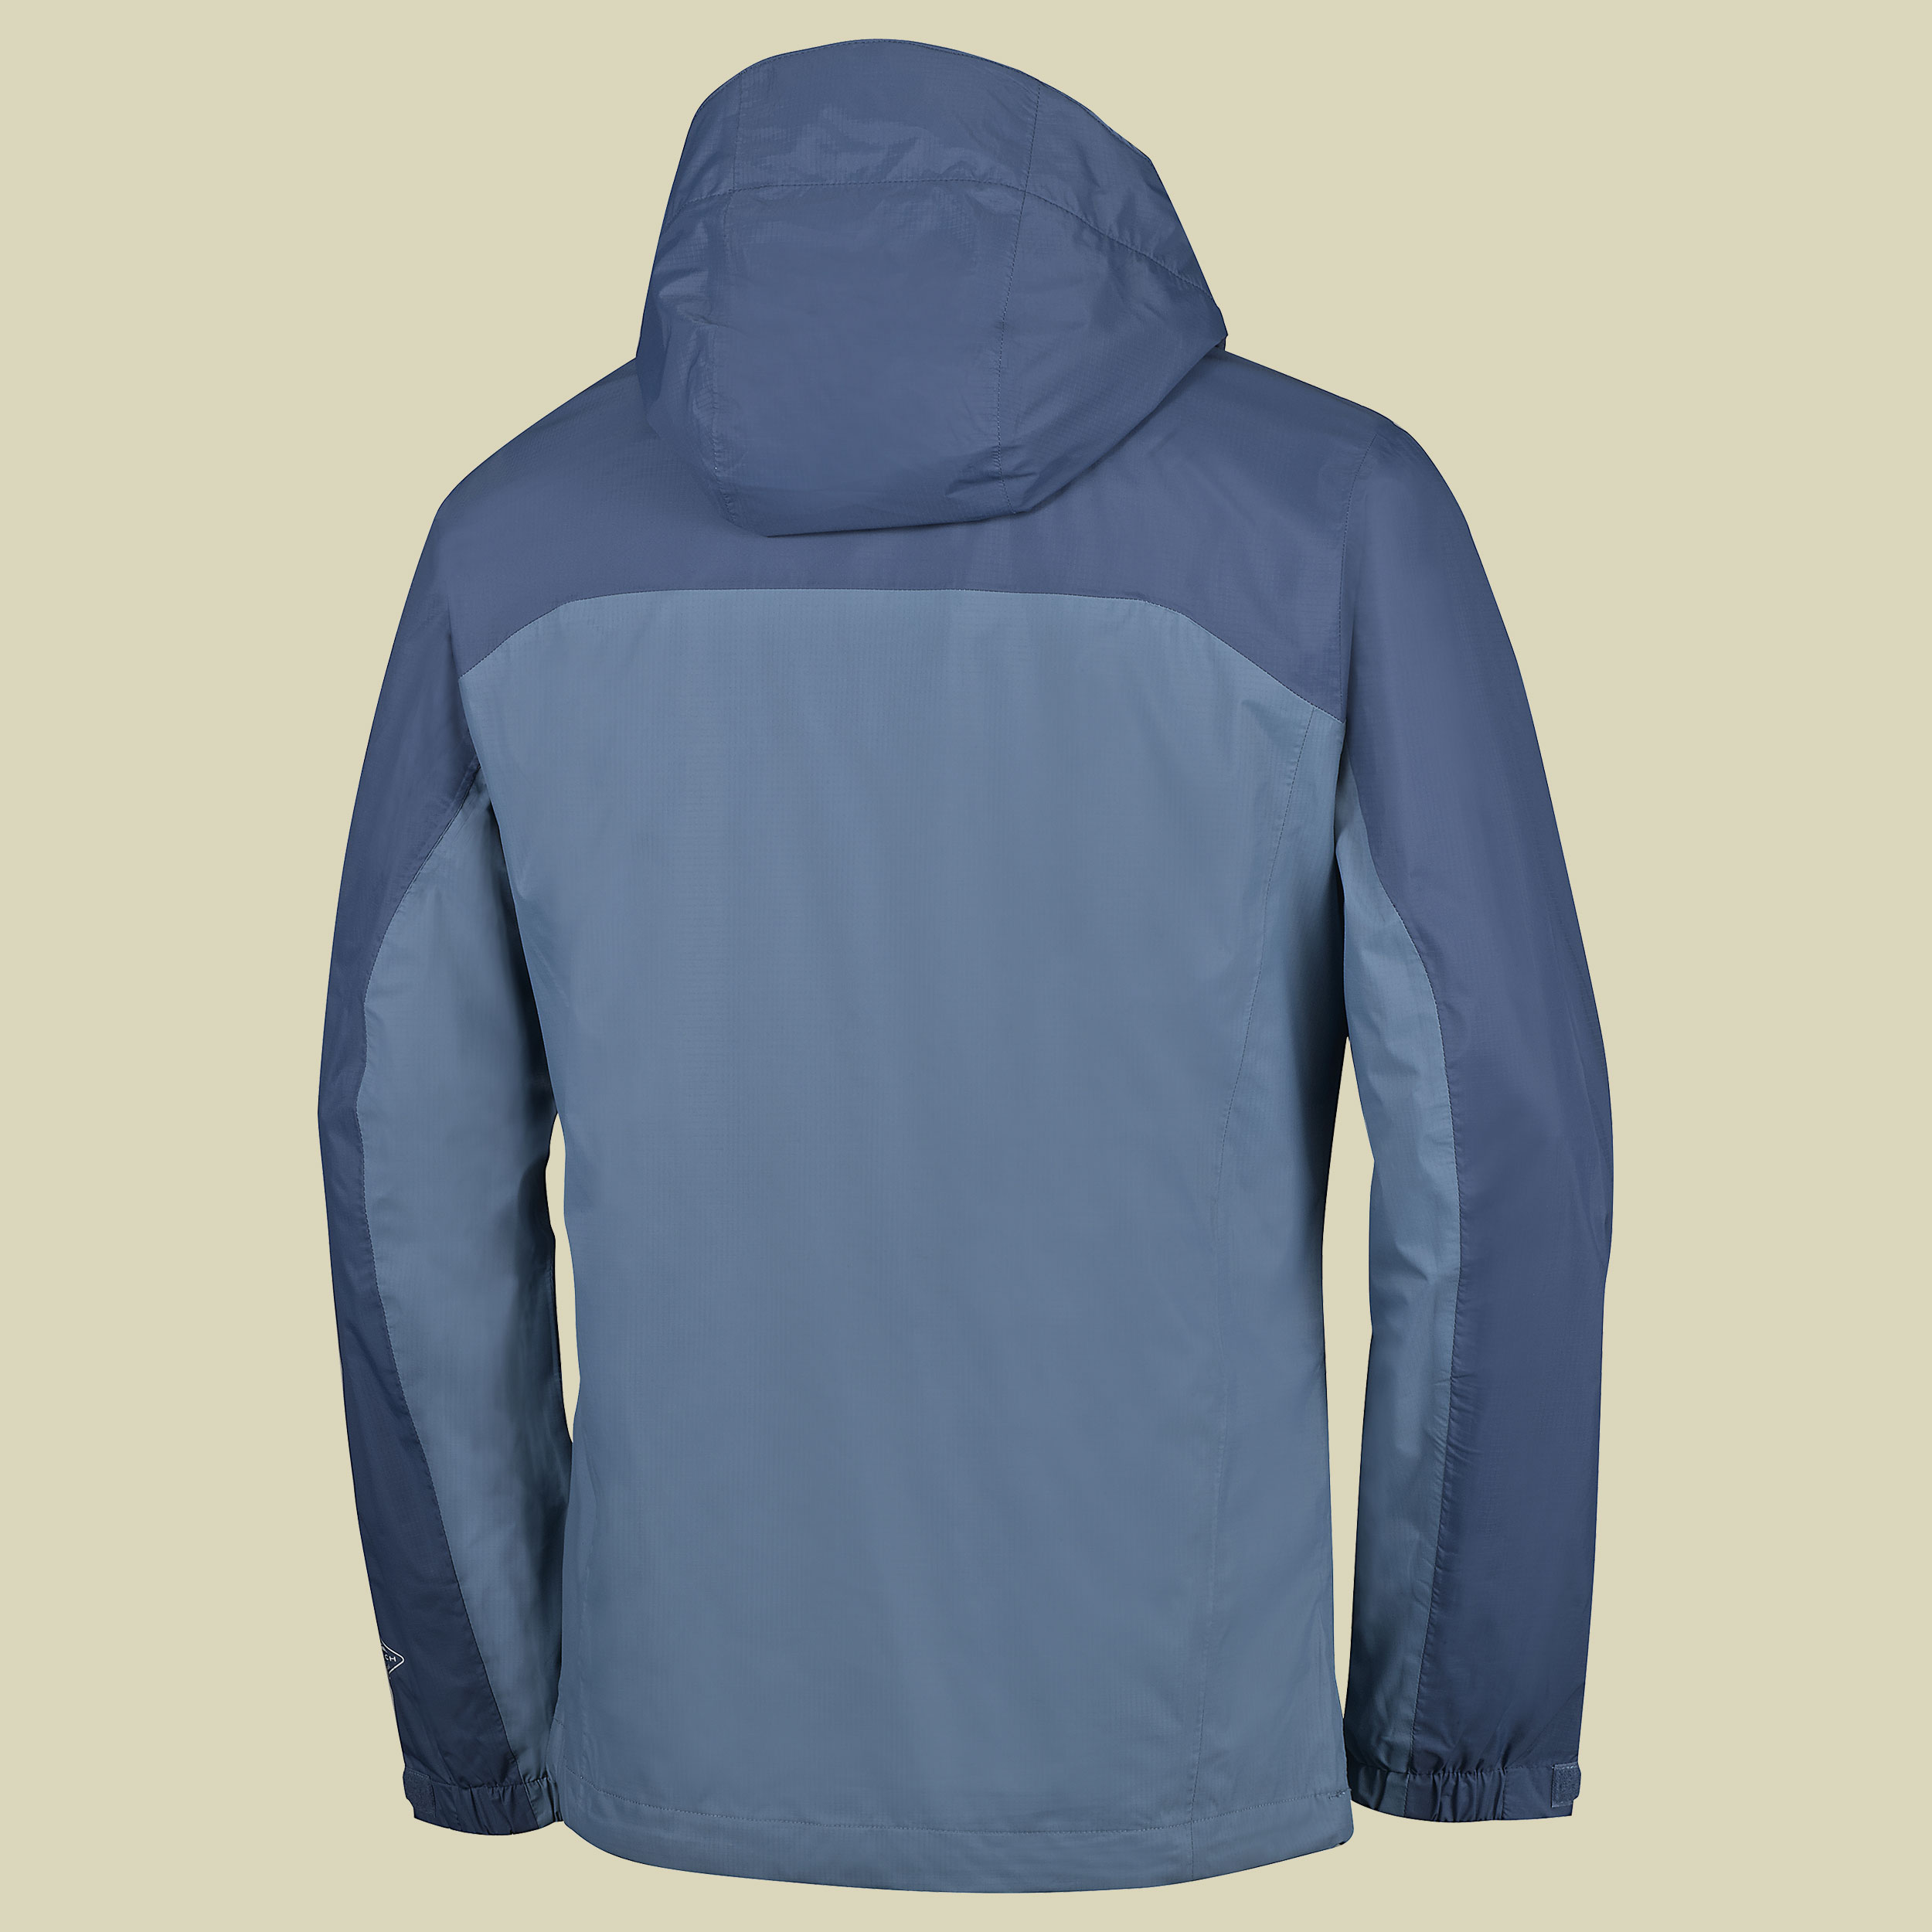 Pouring Adventure Jacket Men Größe S Farbe everblue/night shadow